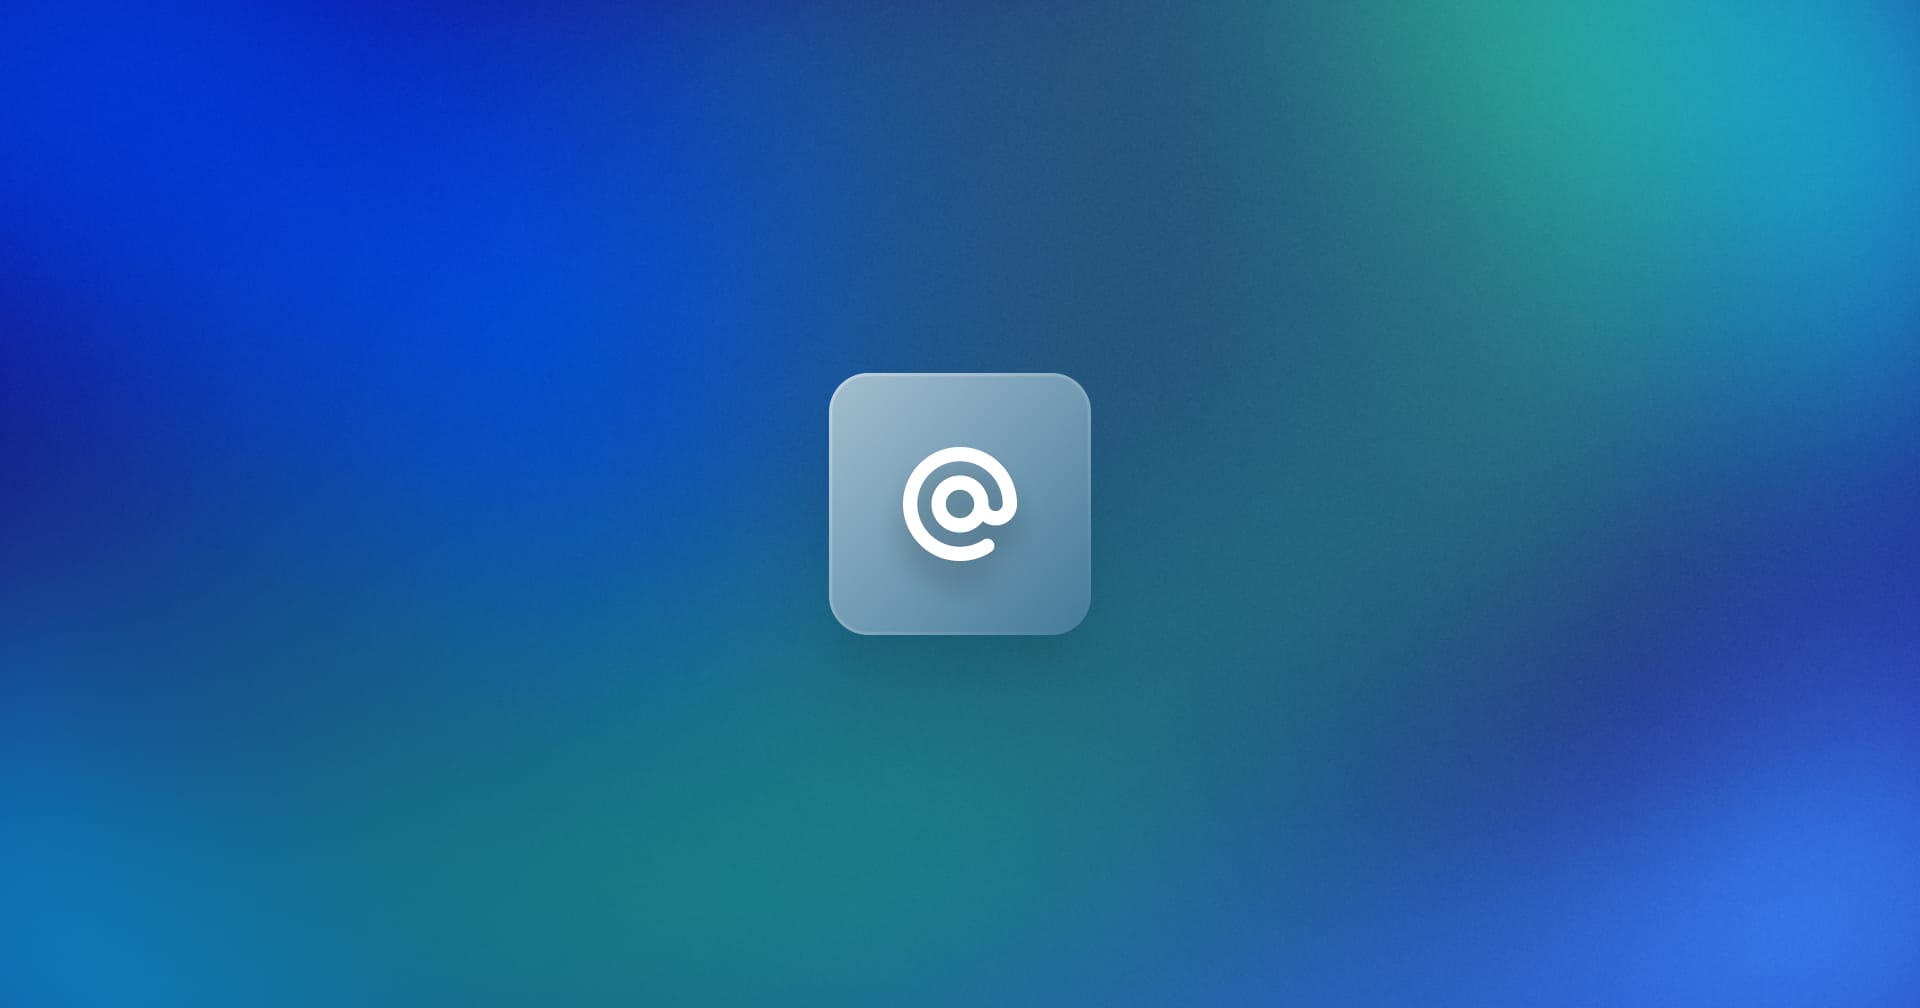 An at icon with a blue-green gradient background